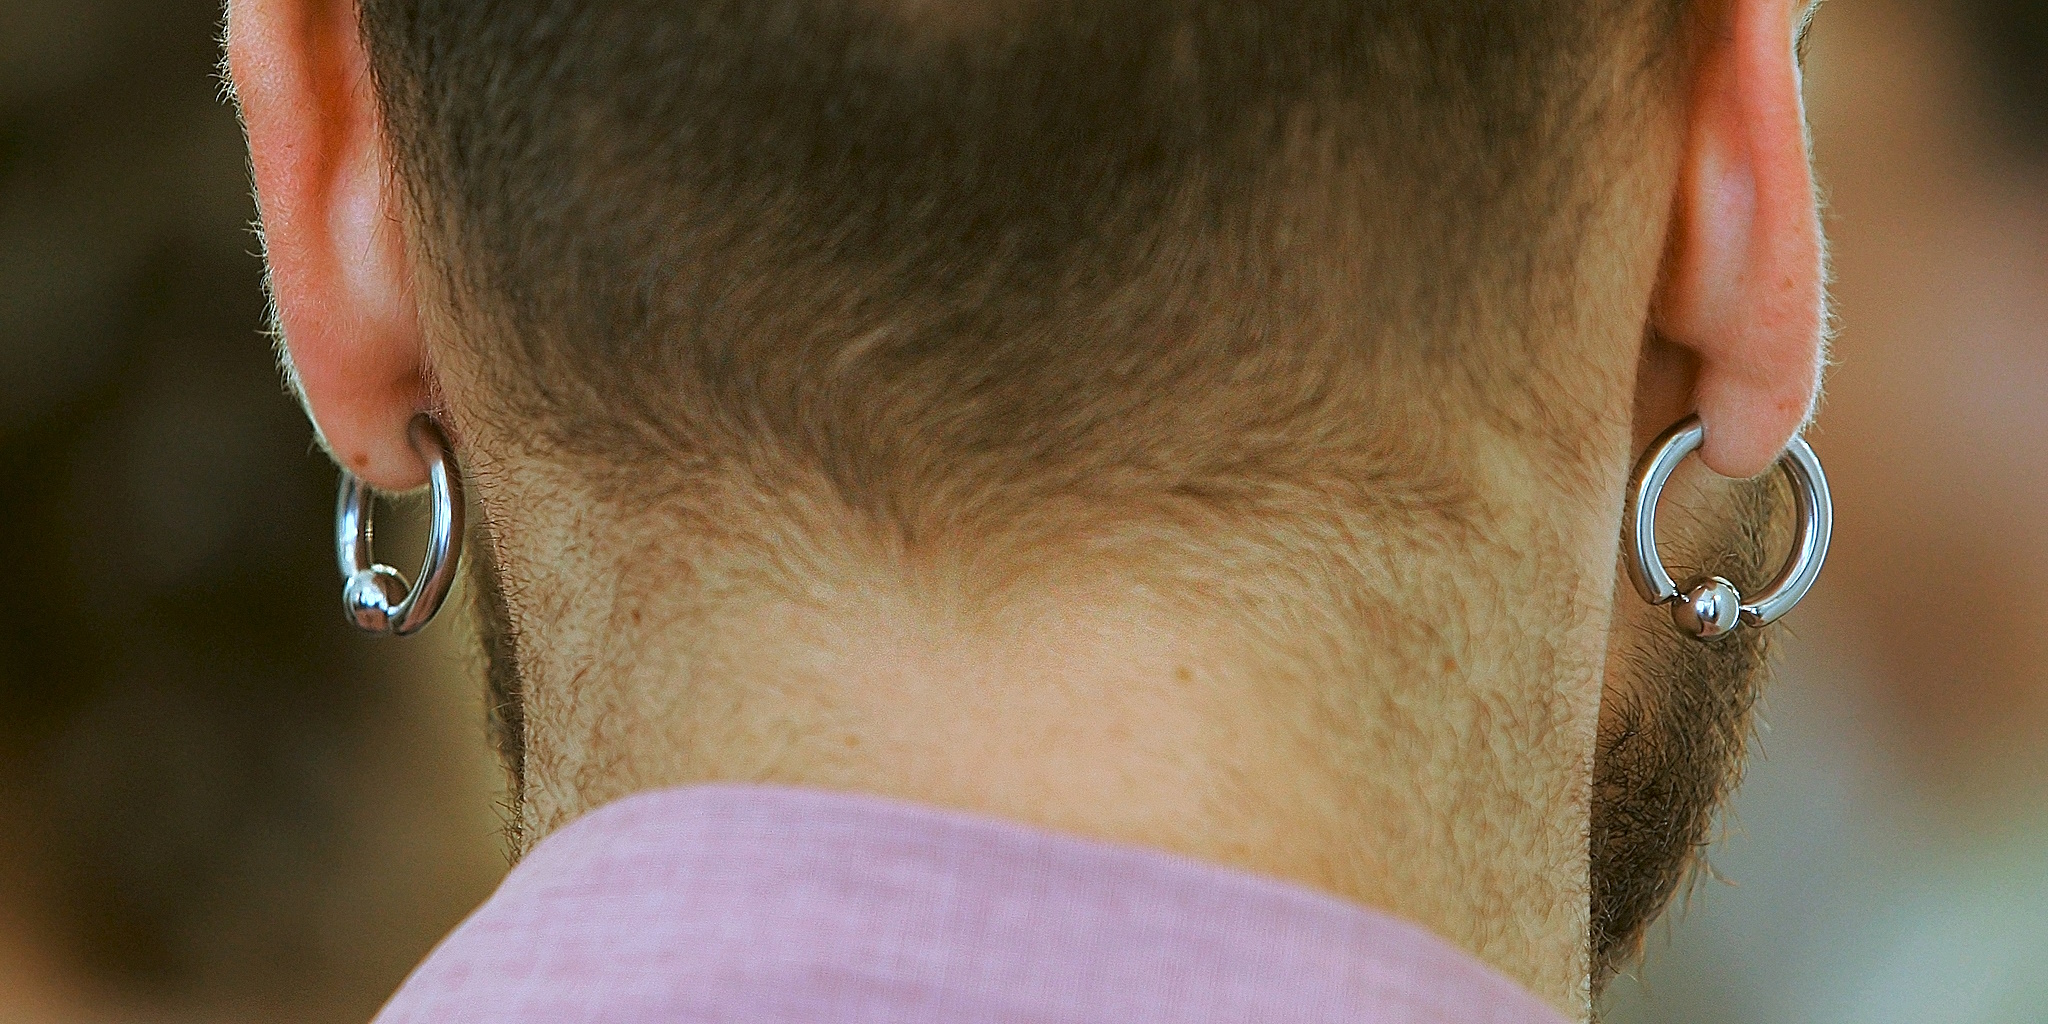 A man viewed from the back with an earlobe piercing in each ear.